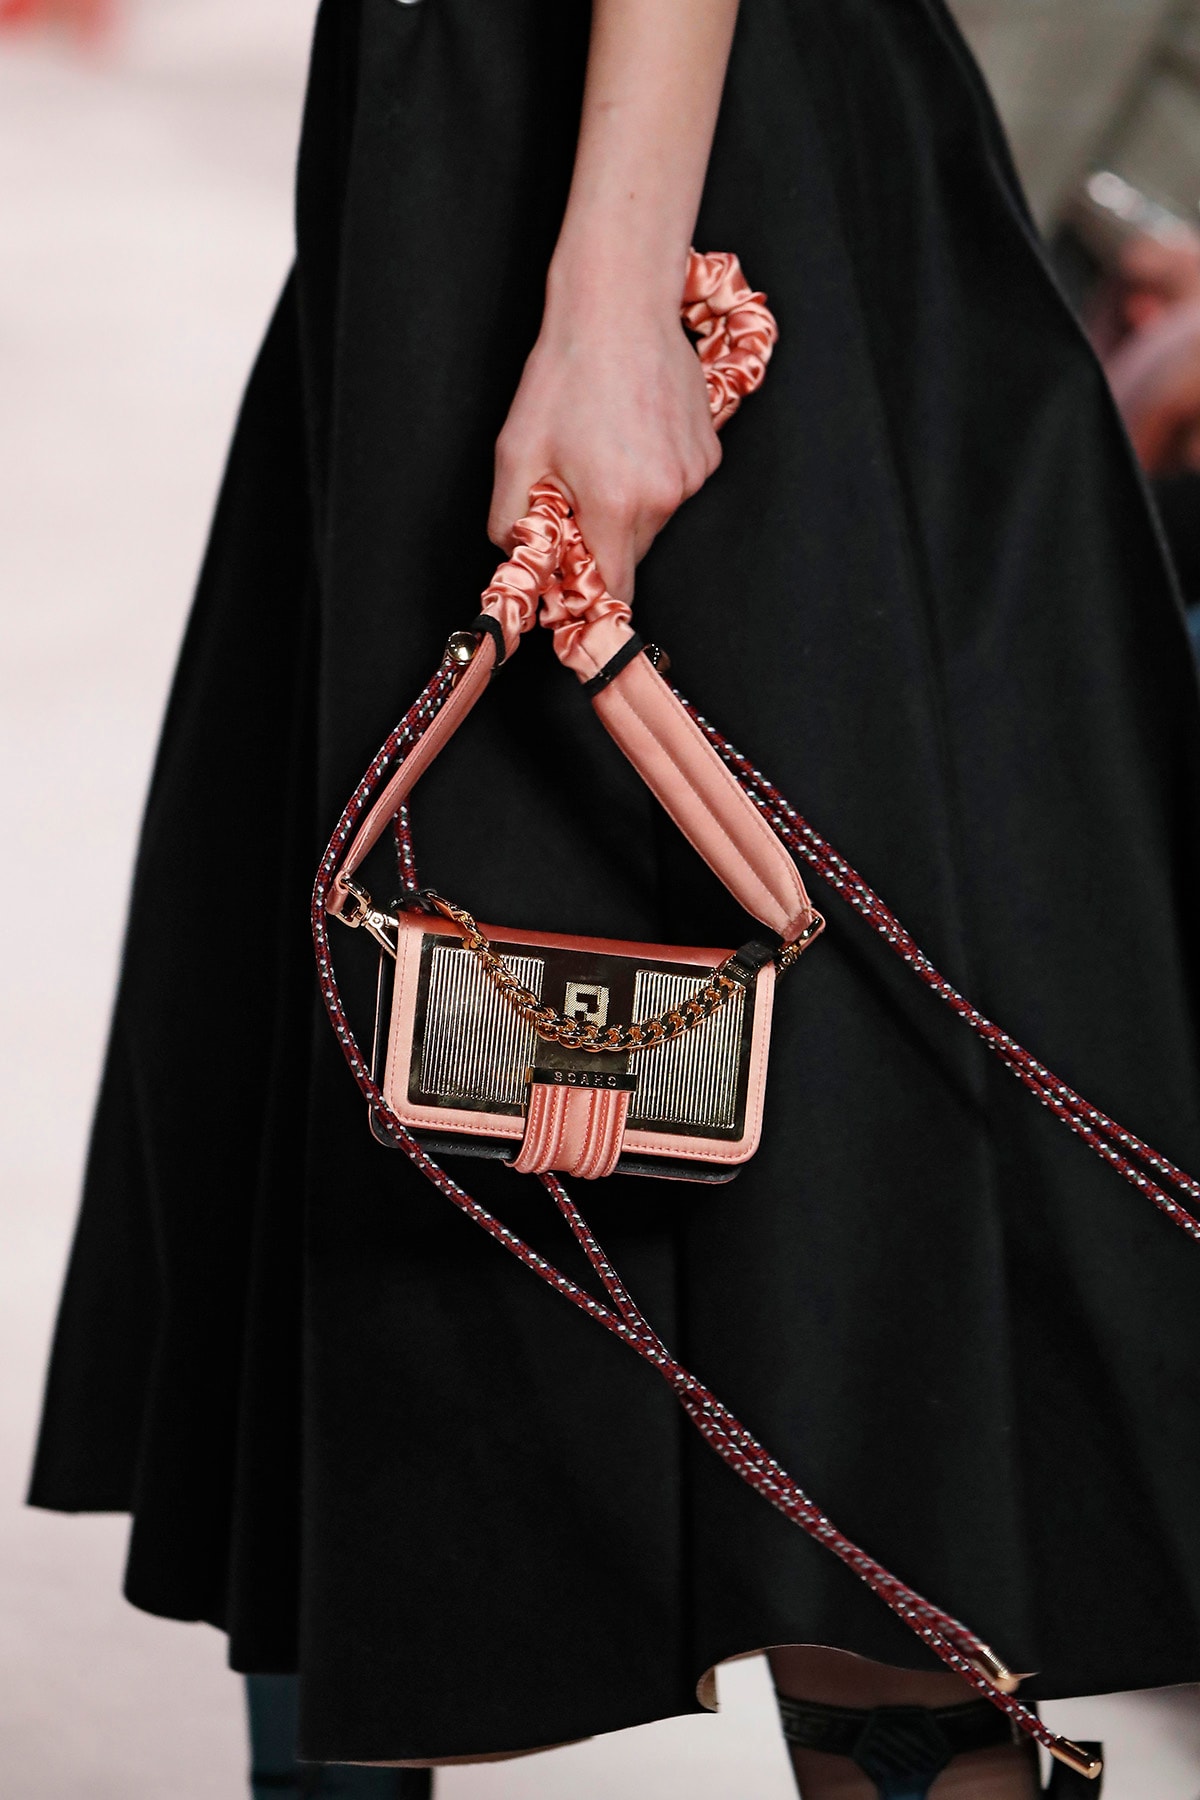 Chanel Cruise 2020: 8 star bags spotted on the runway